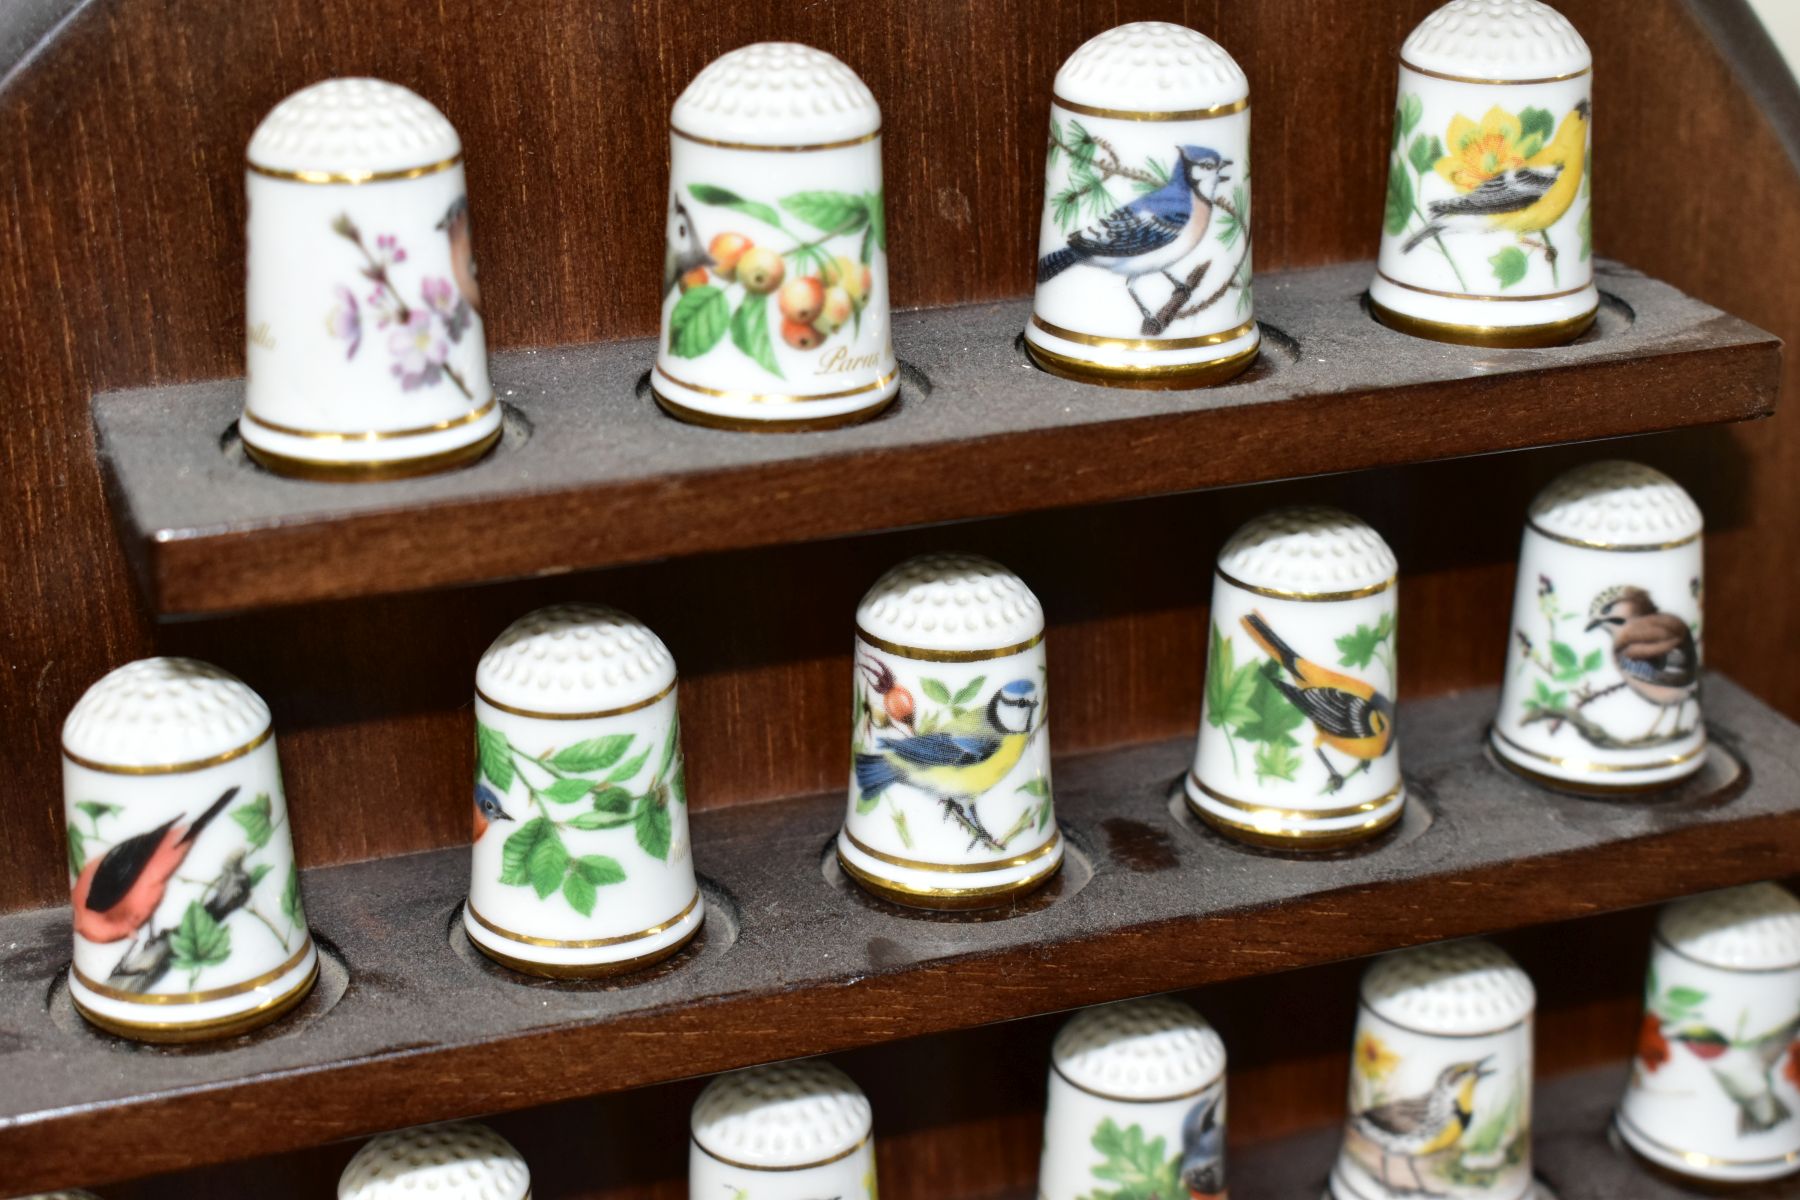 TWO WALL HANGING THIMBLE DISPLAY SHELVES CONTAINING MODERN PORCELAIN THIMBLES, comprising a set of - Image 6 of 15